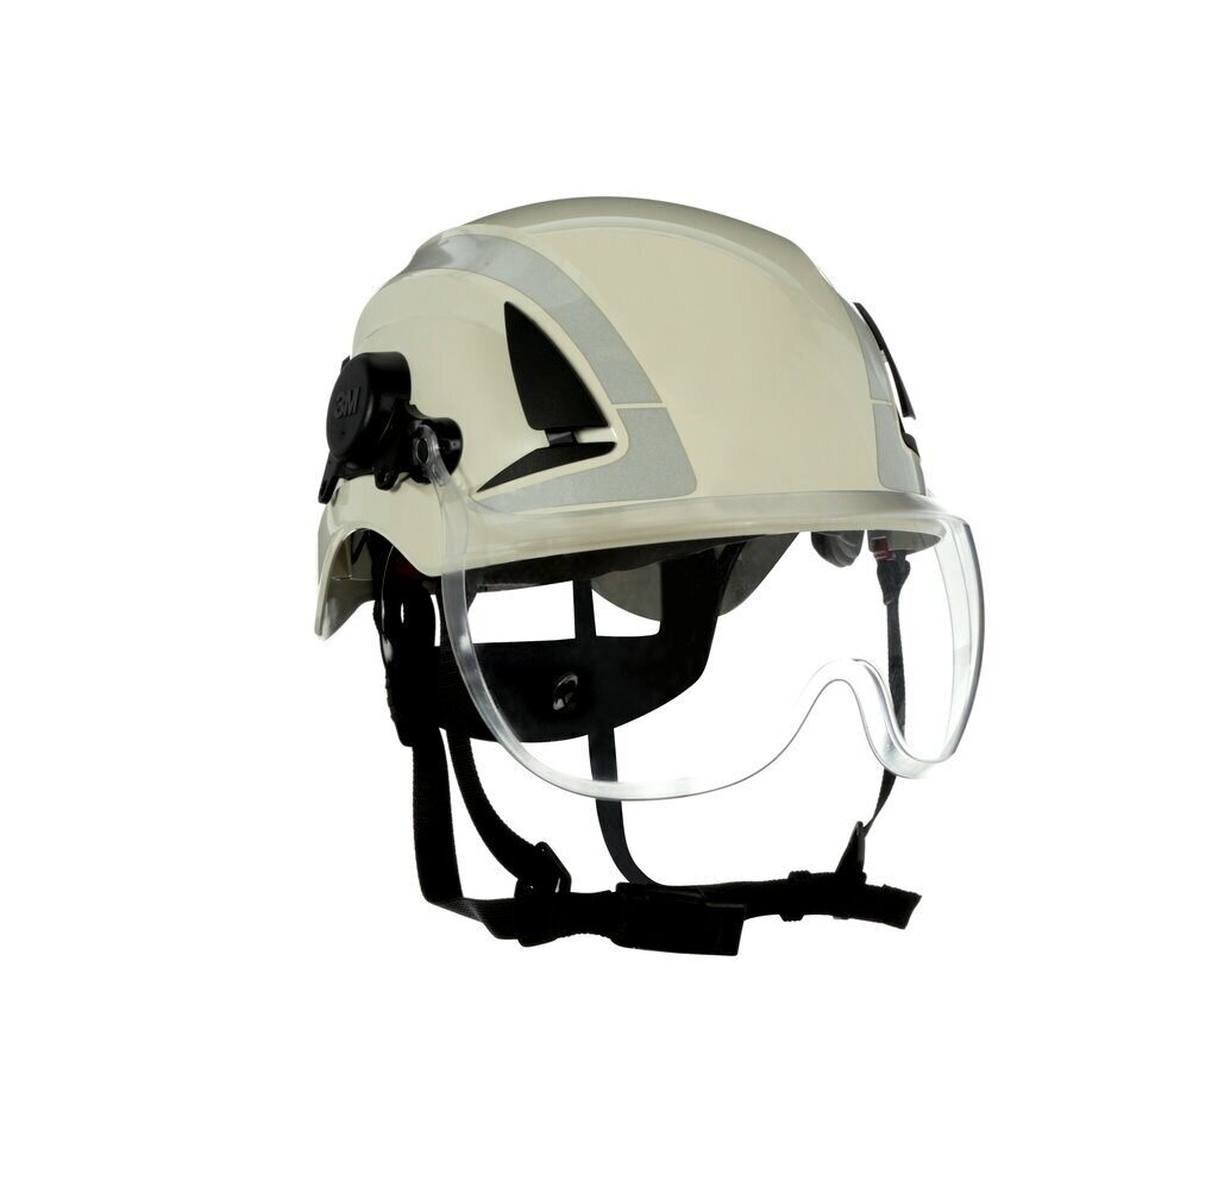 3M short visor X5-SV01-CE for safety helmets X5000 and X5500, transparent, anti-fog and anti-scratch coating, polycarbonate